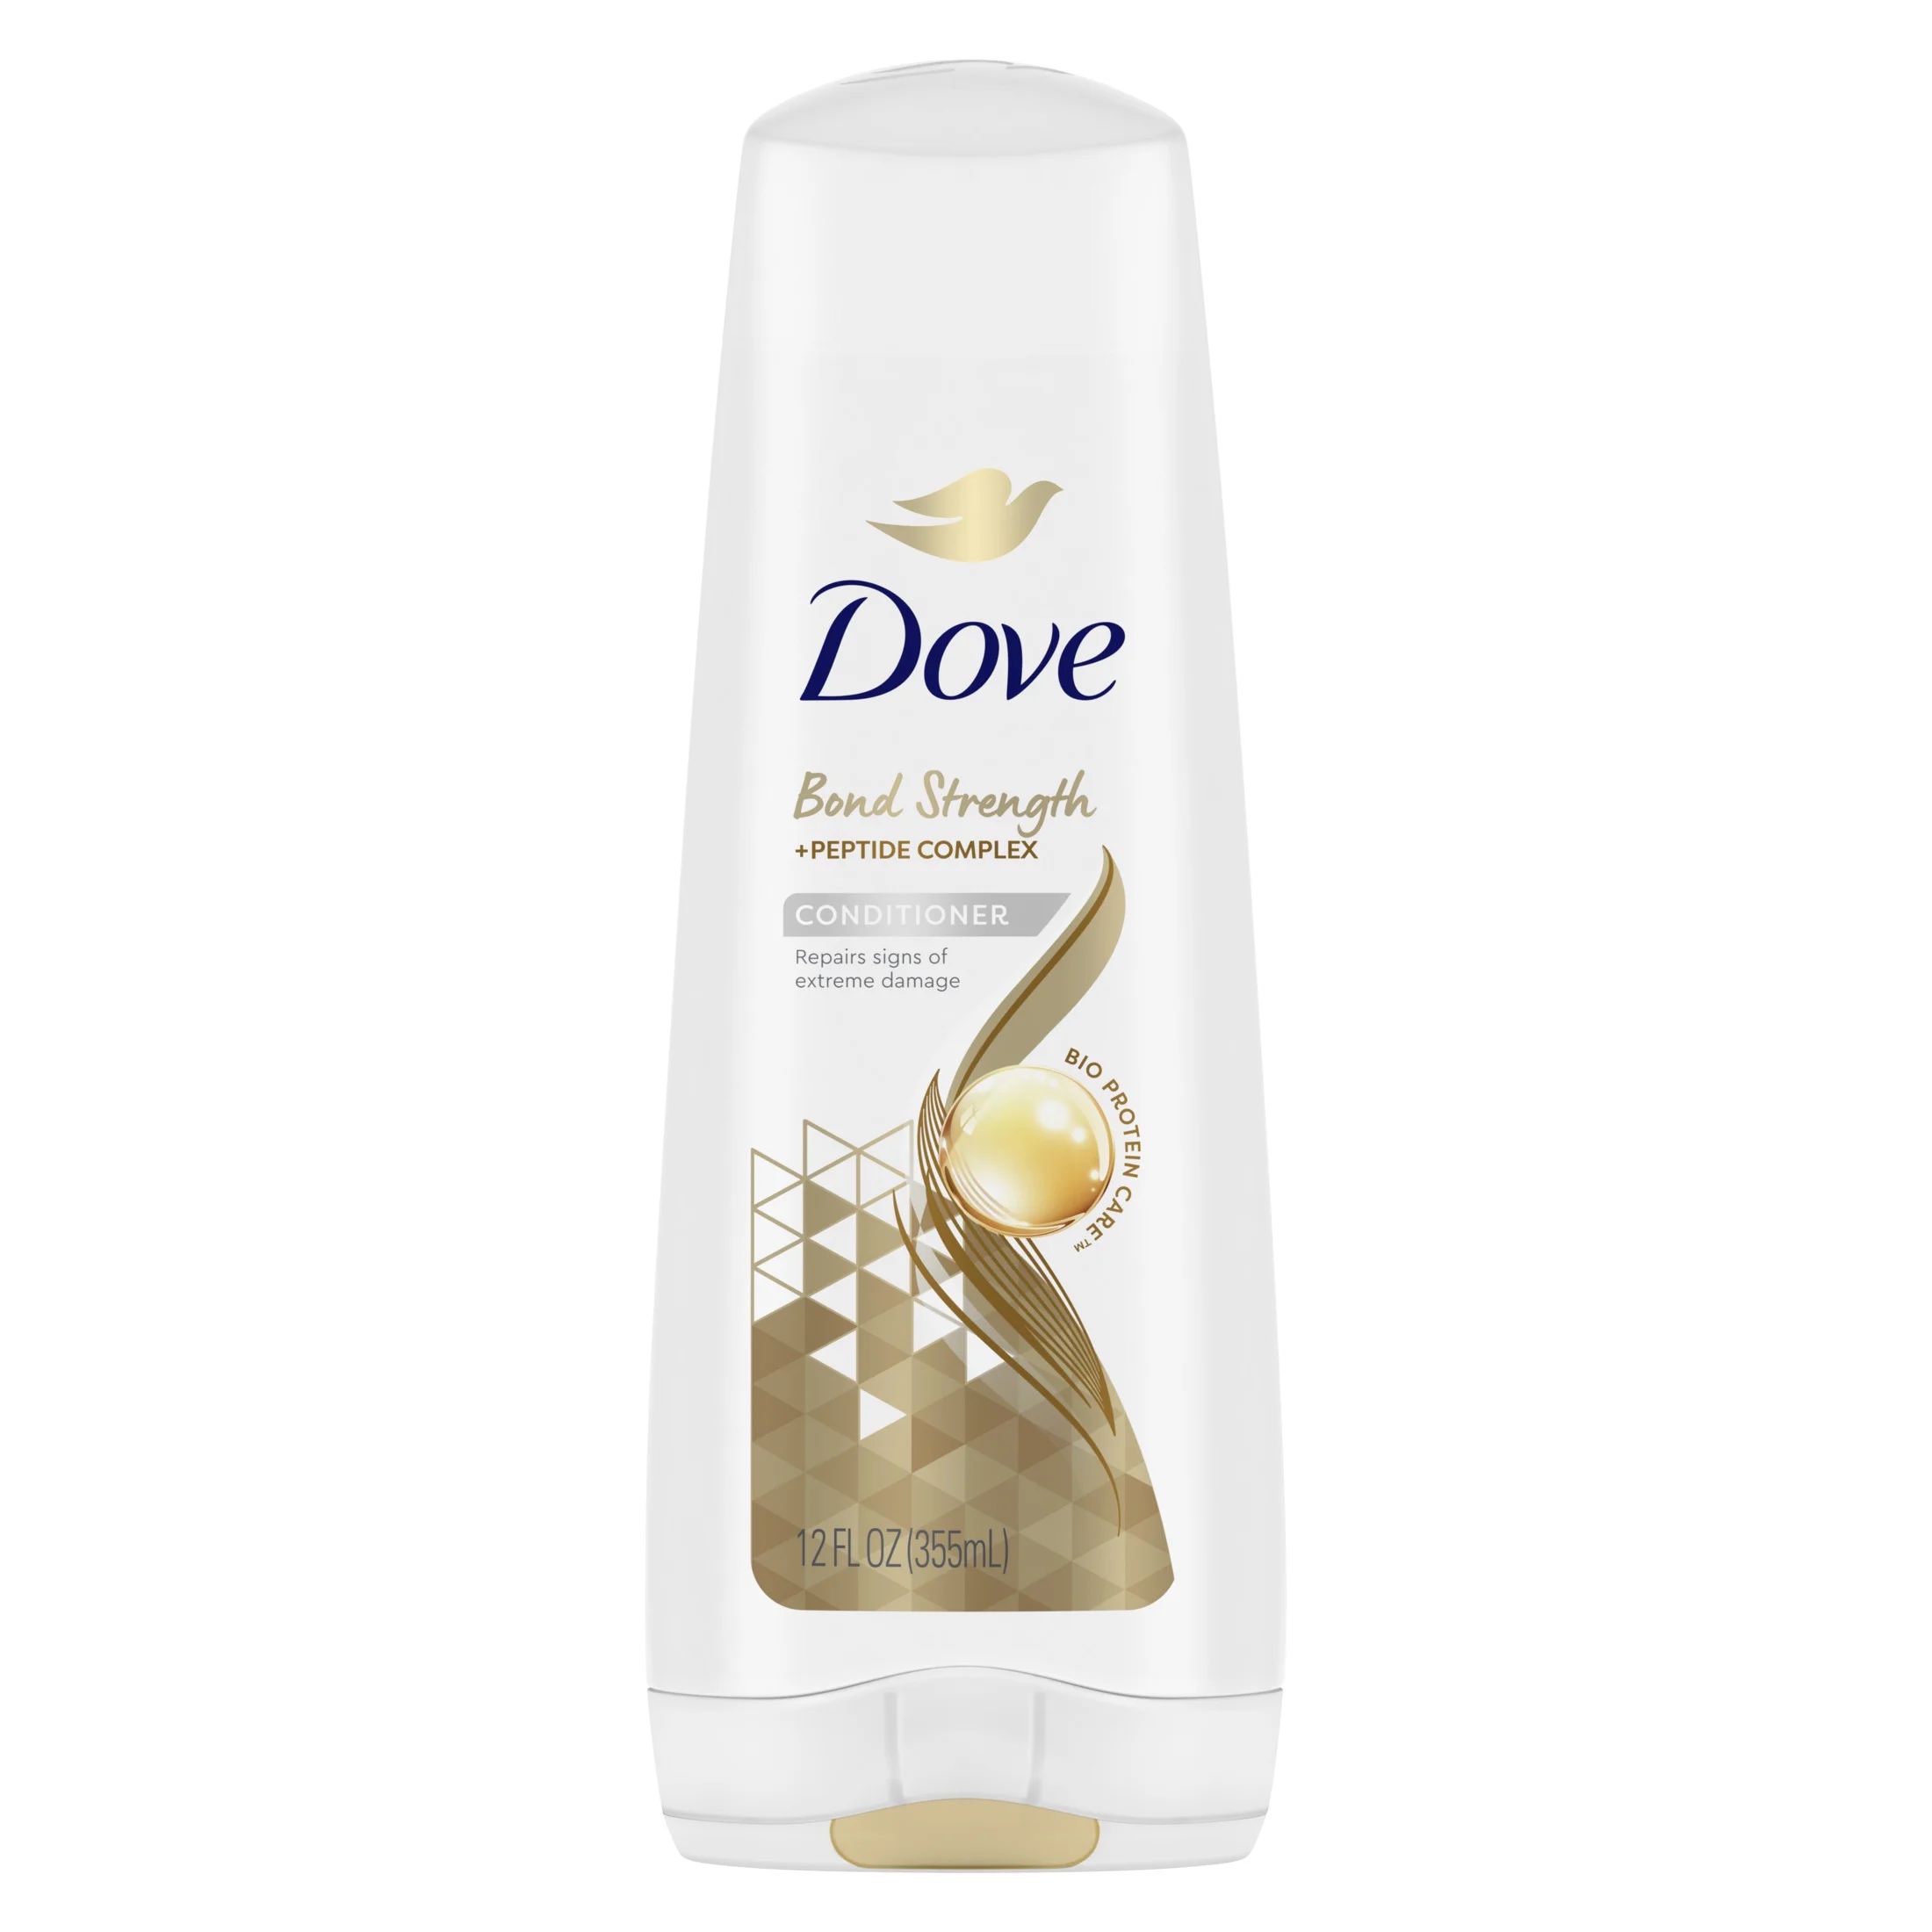 Dove Bond Strength Conditioner with Peptide Complex for Damaged Hair, 12 fl oz | Walmart (US)